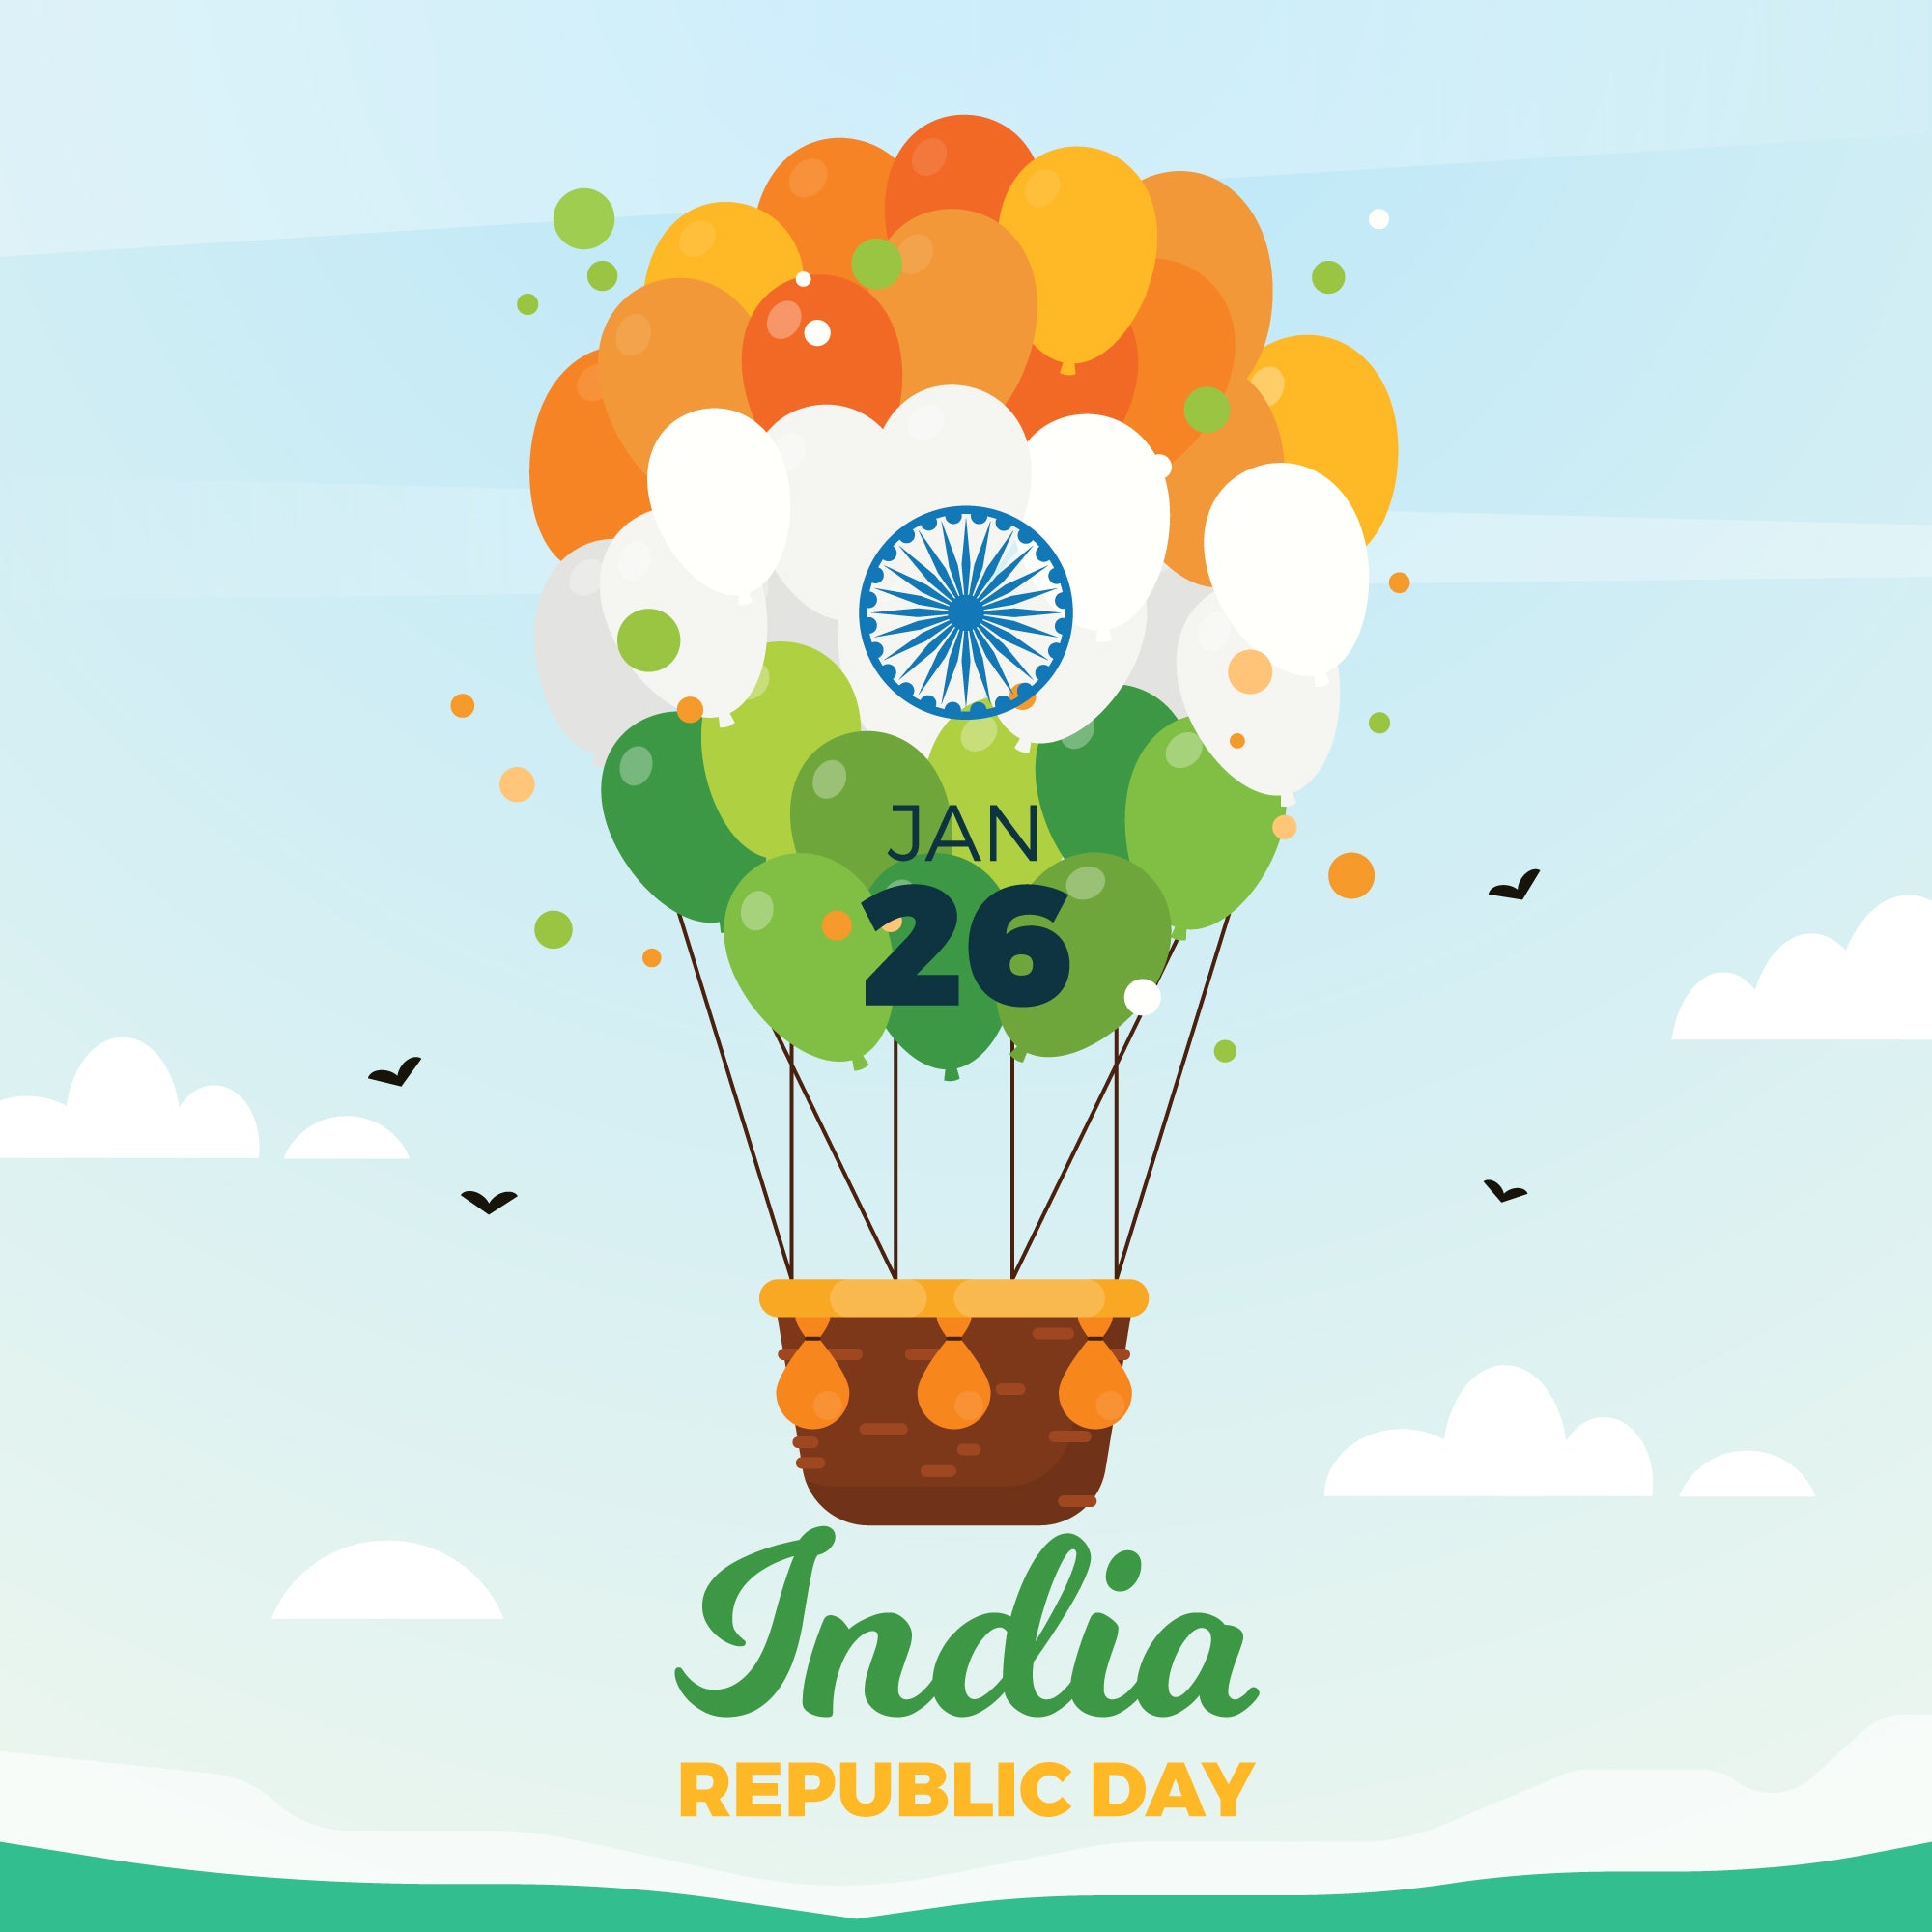 Republic Day 2023: गणतंत्र दिवस, संविधान दिवस और स्वतंत्रता दिवस में अंतर  क्या है जानिए | Explains: What is the difference between Independence Day, Republic  Day And Constitution Day? - Hindi ...